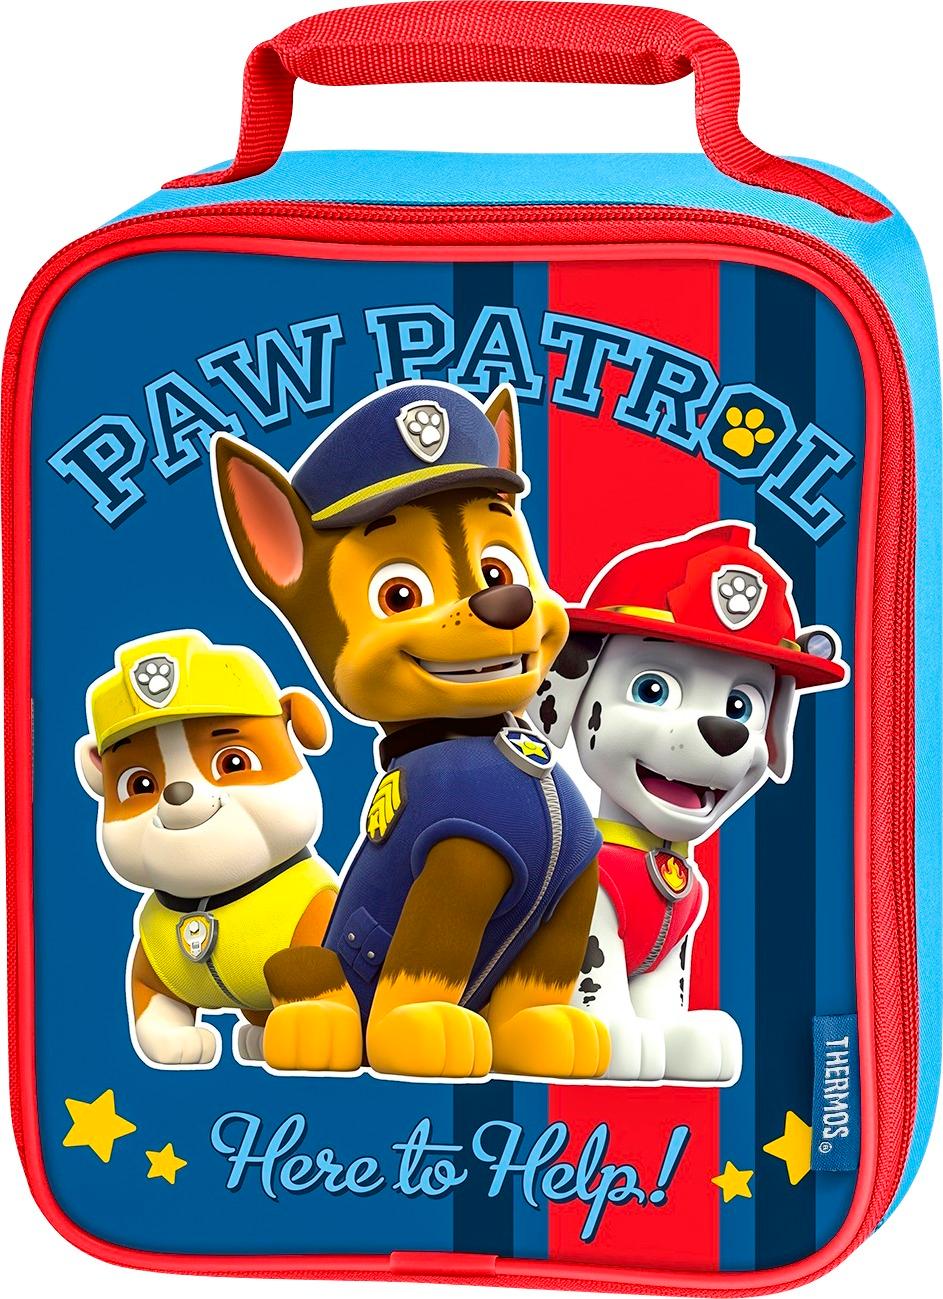 Thermos Paw Patrol Lunch Kit 1 Ea, Lunchbox Necessities